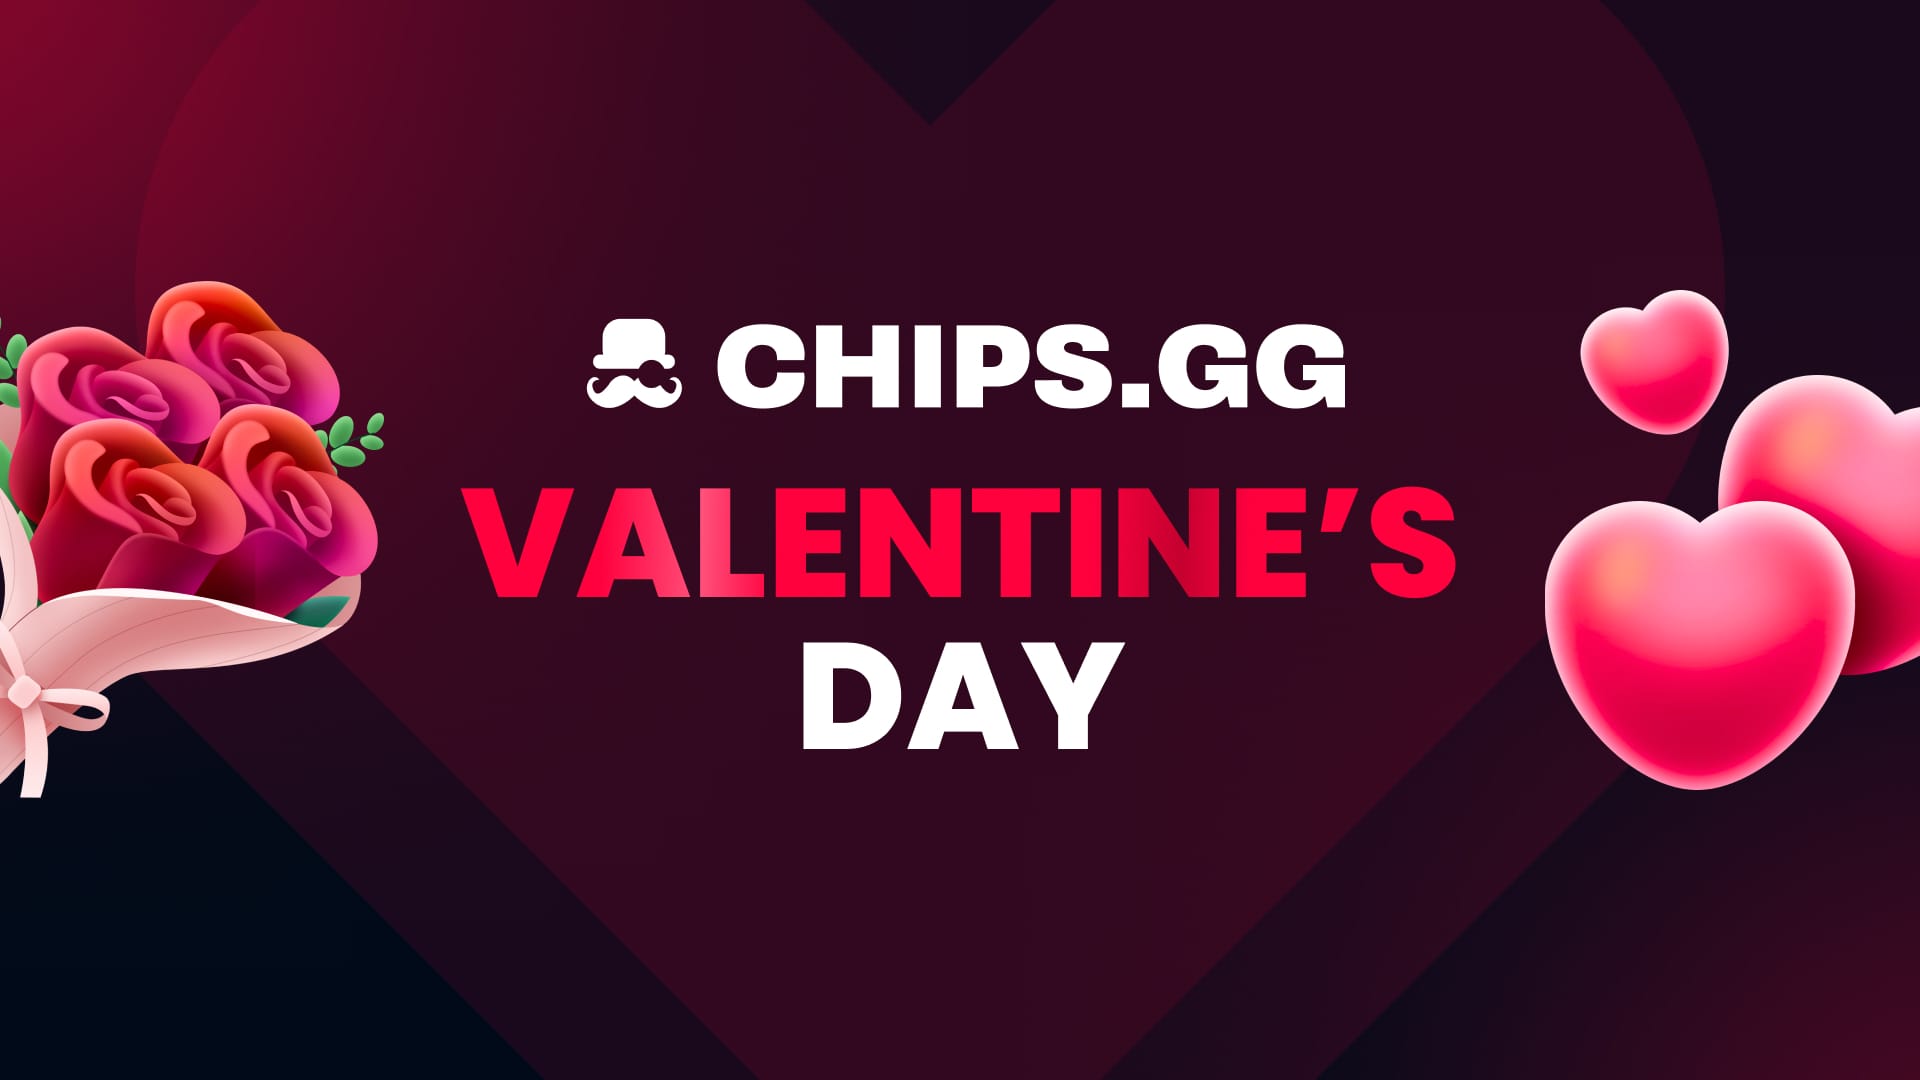 Chips.gg Valentine's Day promo banner with hearts and roses, announcing a $1000 Points Race.